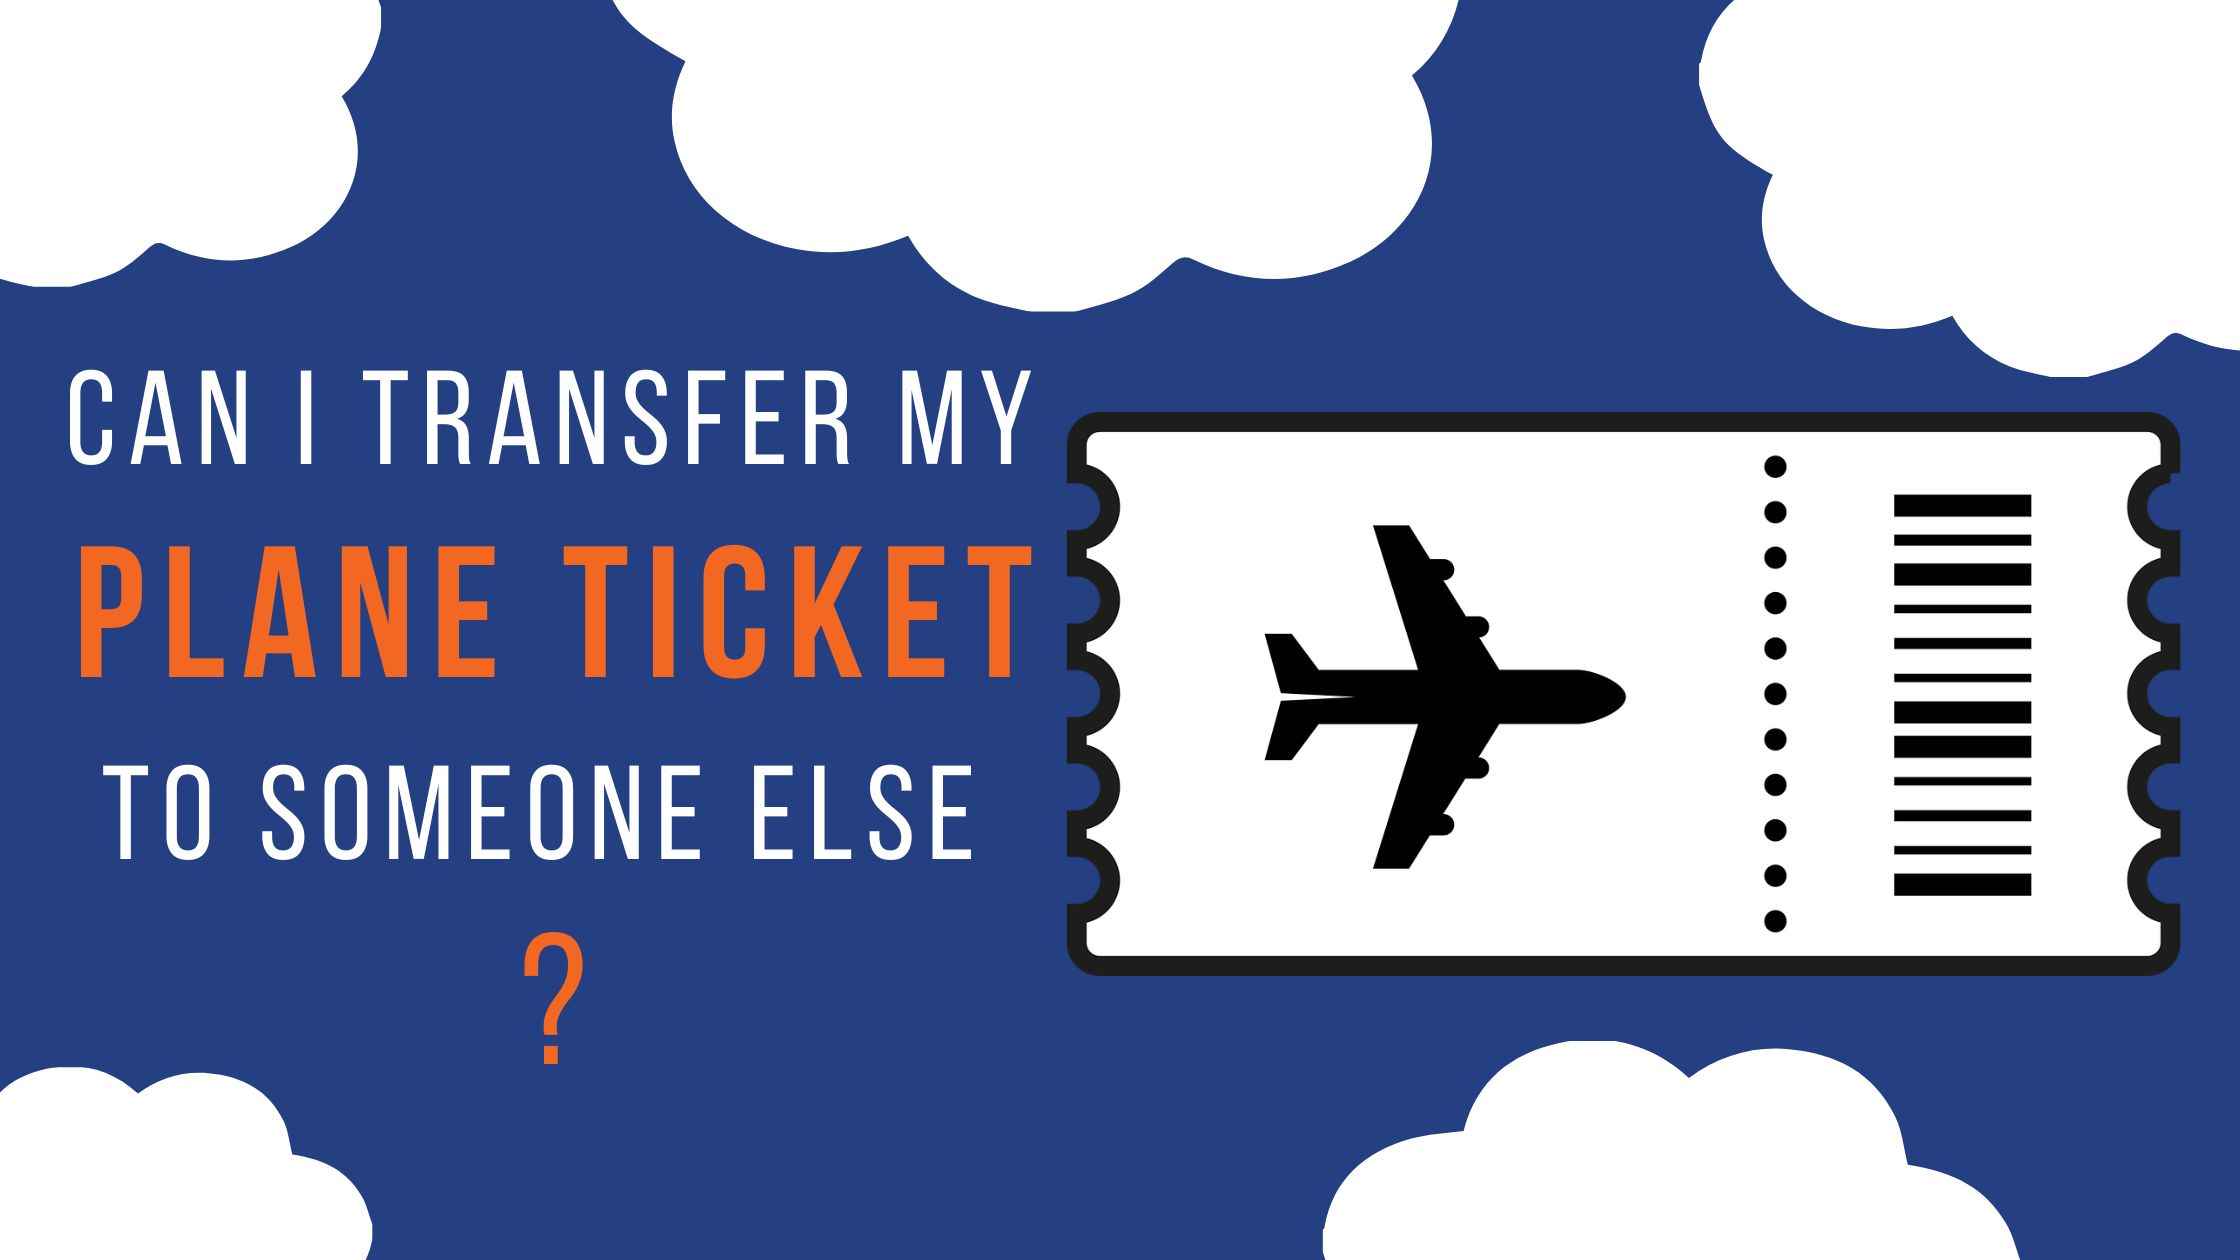 Can you Transfer Your Plane Ticket To Someone Else?